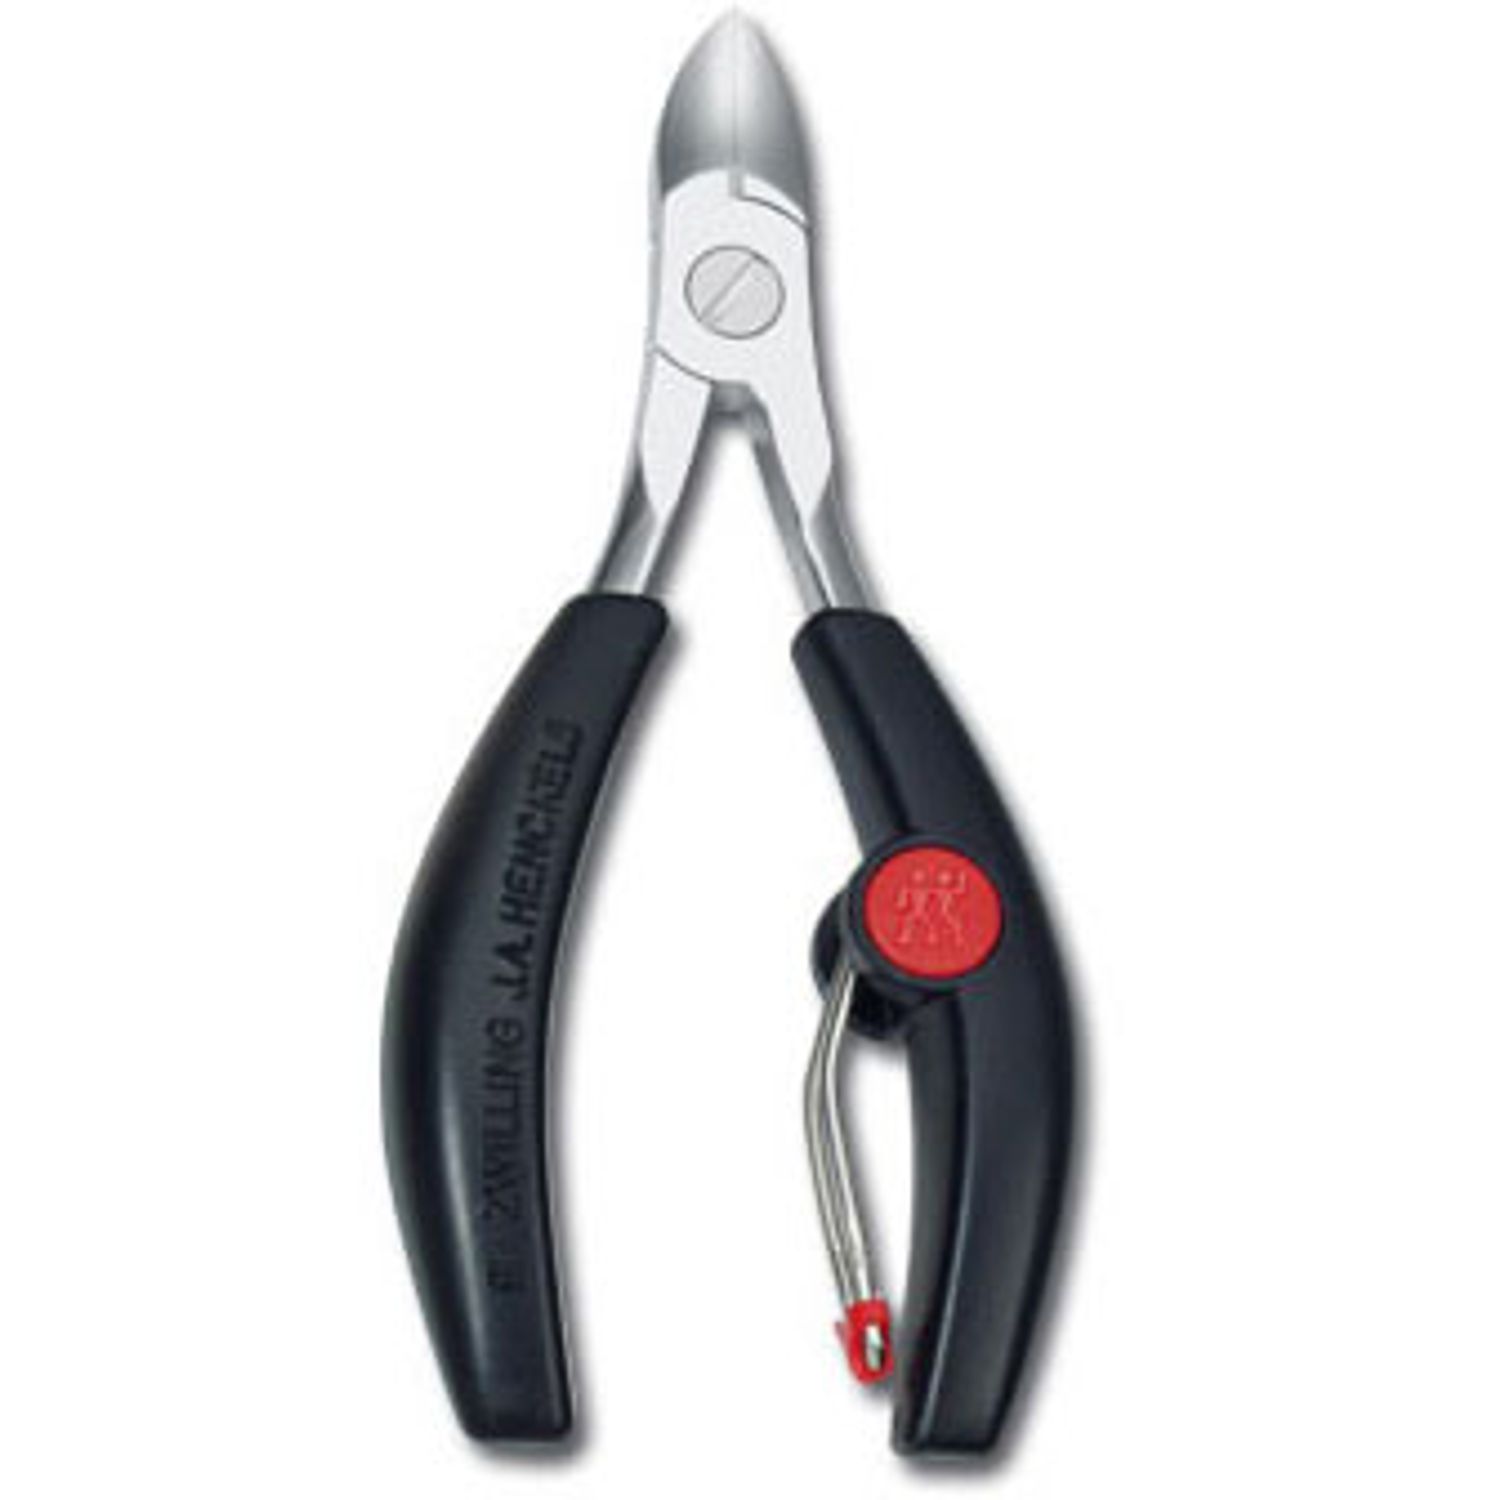 ZWILLING J.A. HENCKELS Manicure & Pedicure Finger Nail Clippers for sale